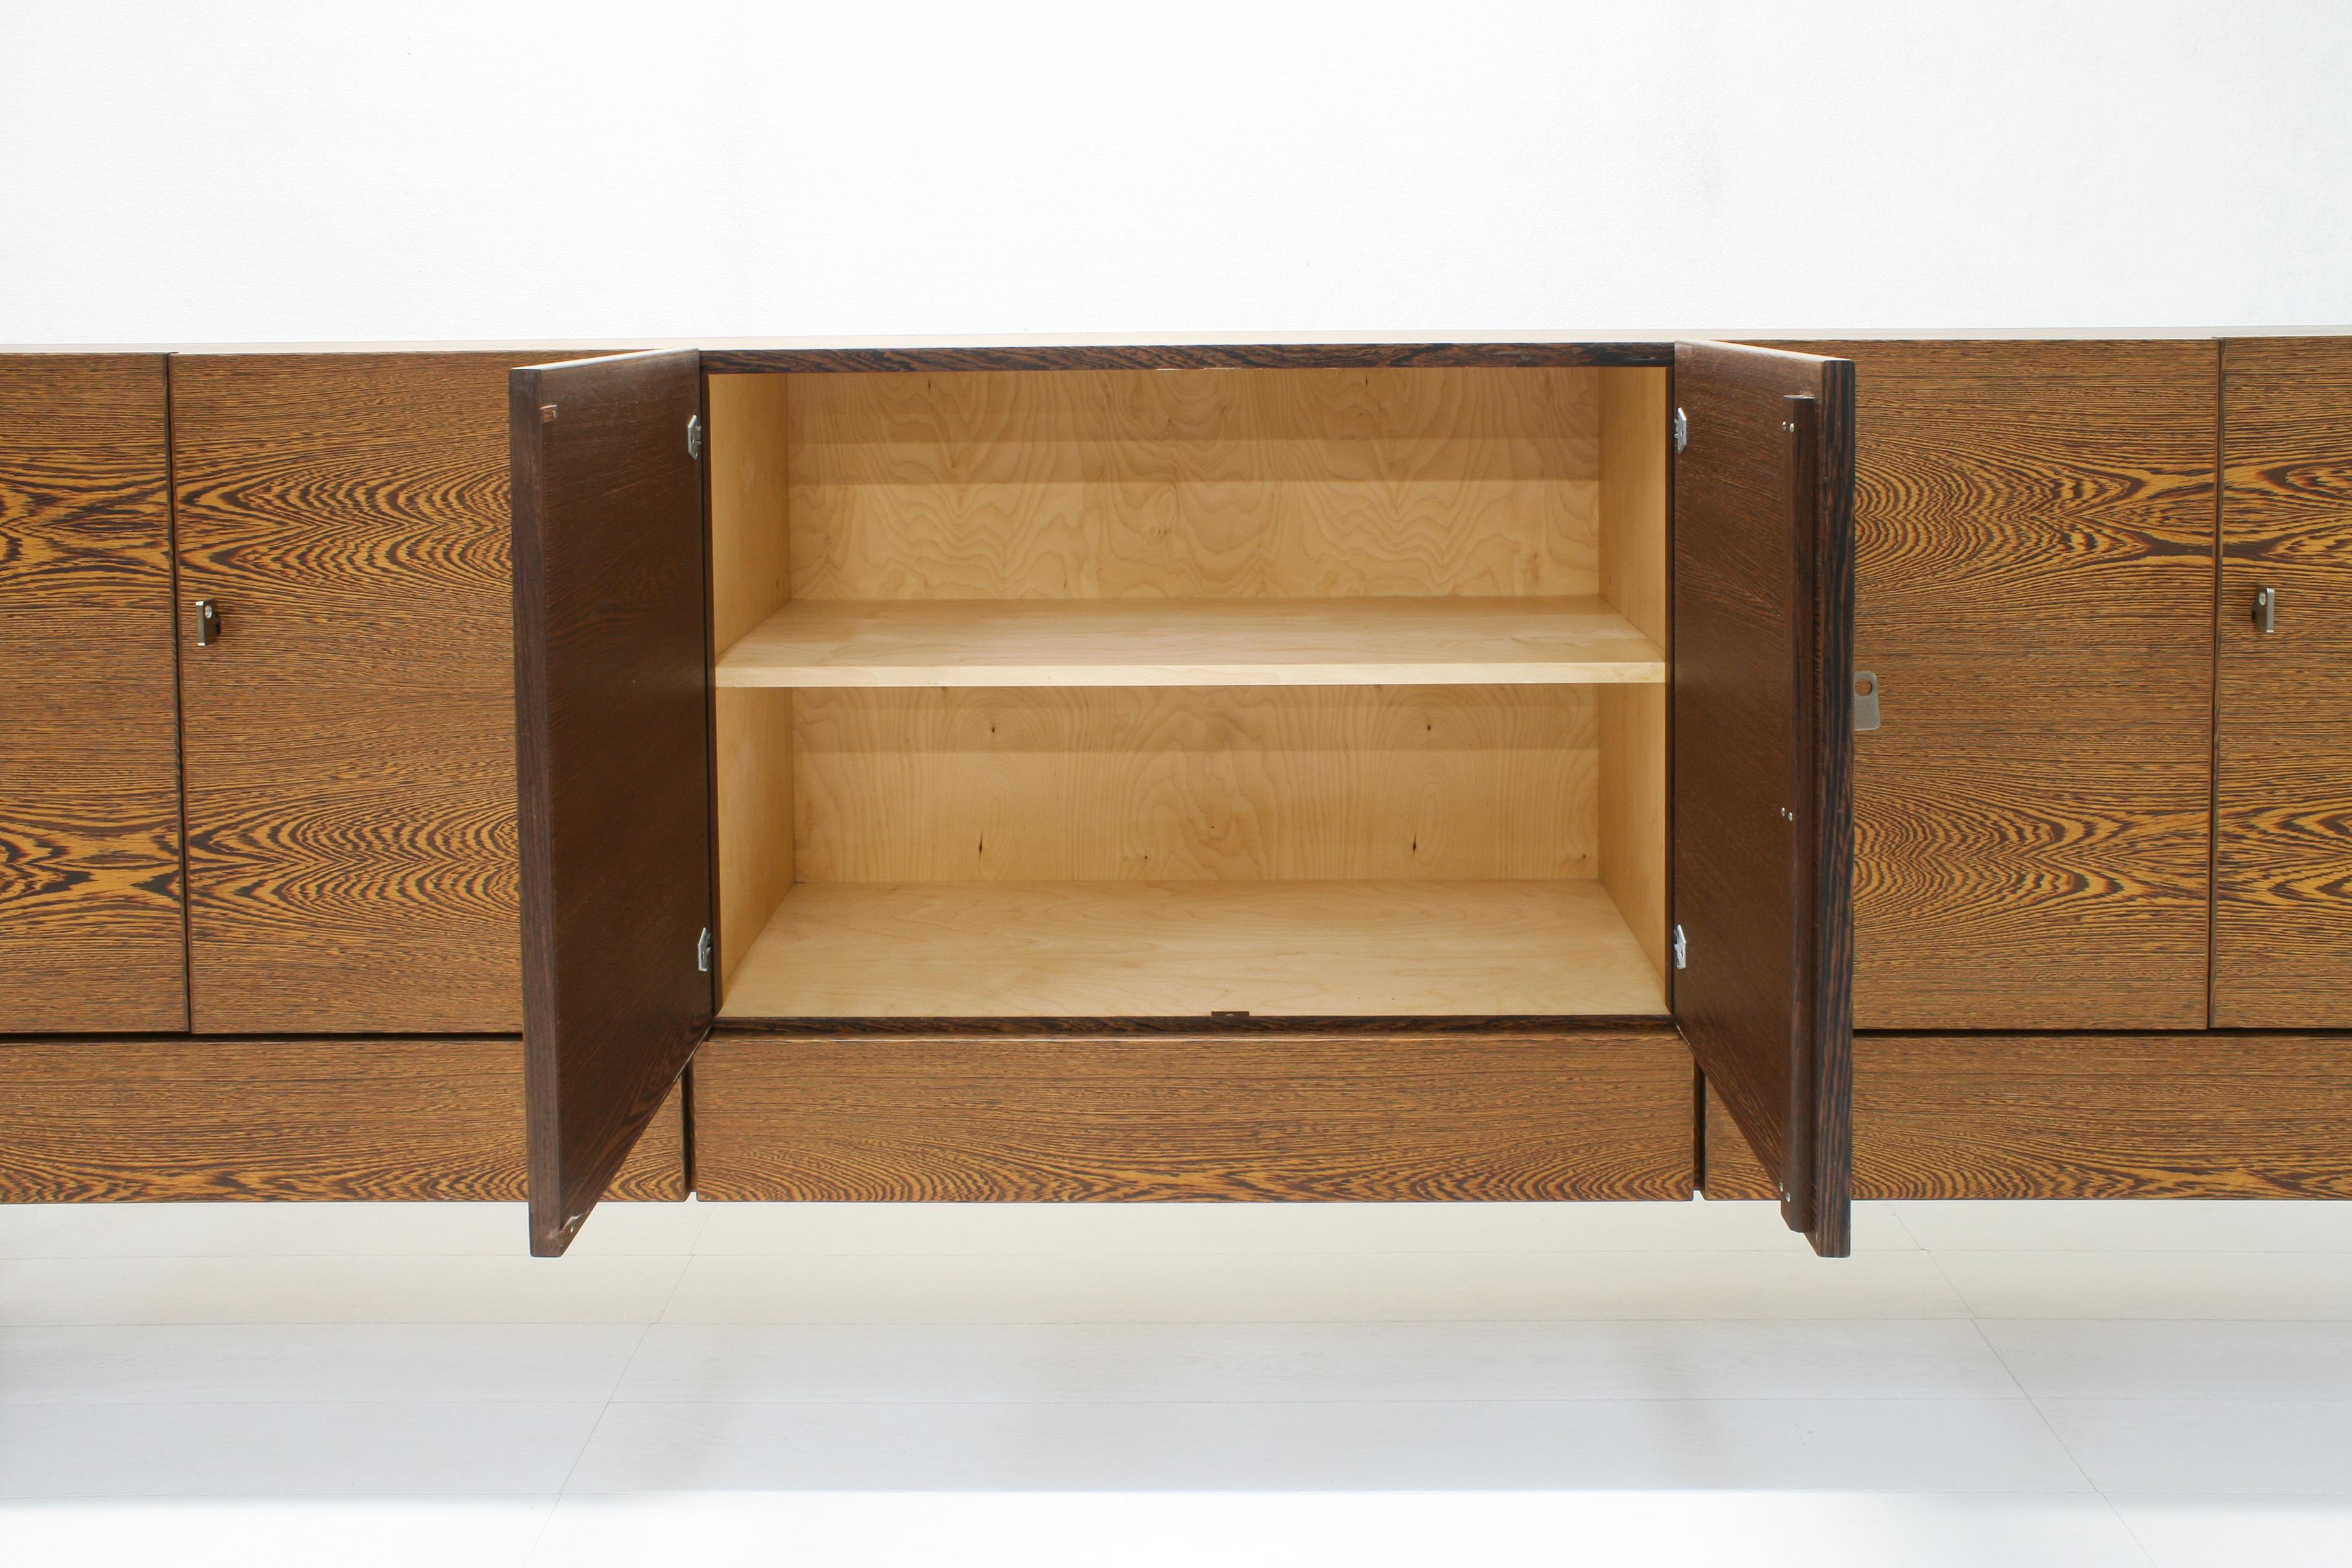 Sled Base Sideboard in Wengé from N-Line International, Belgium, 1970s For Sale 9